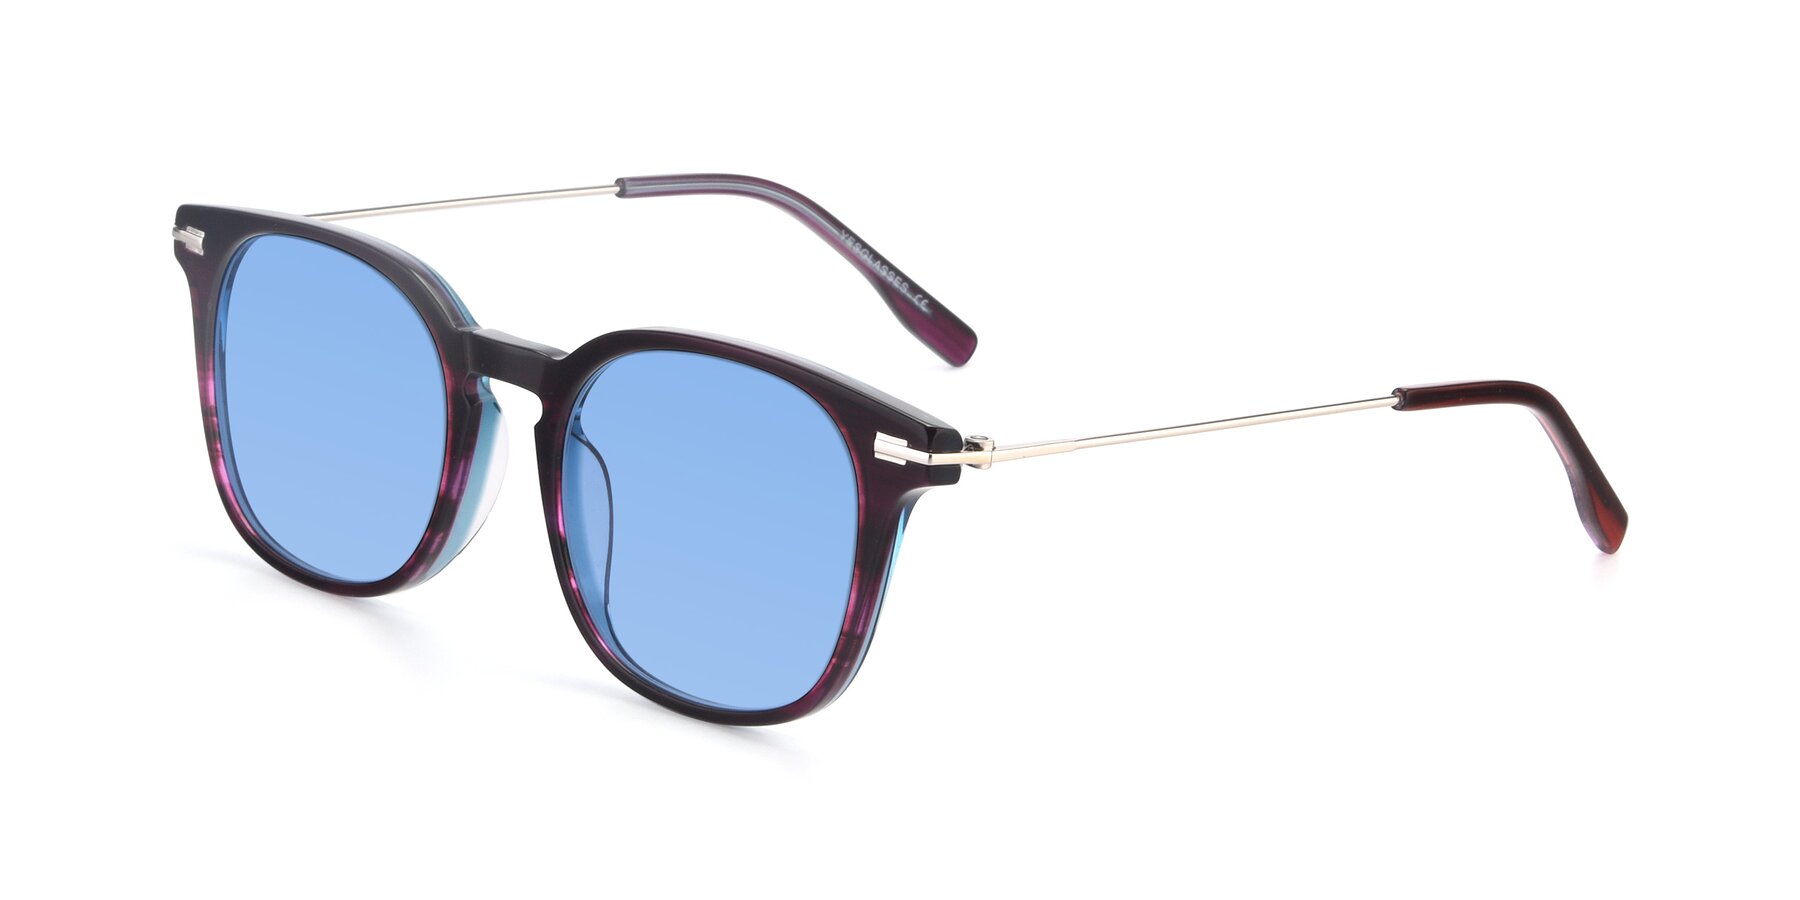 Angle of 17711 in Dark Purple with Medium Blue Tinted Lenses